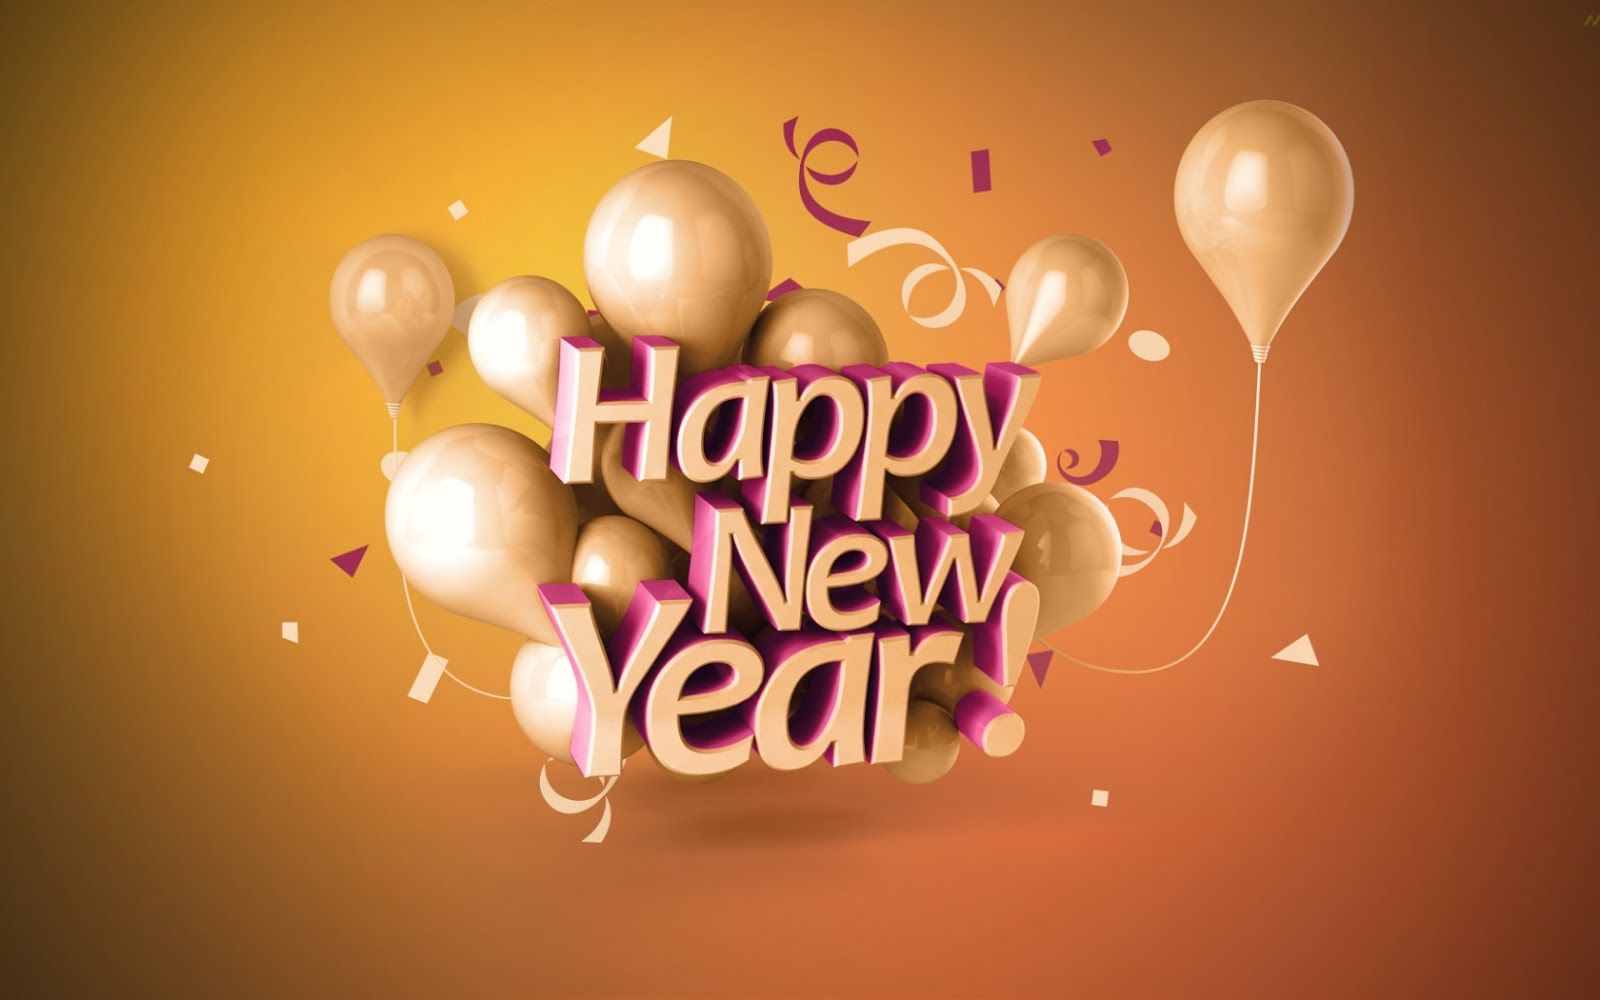 Happy New Year Wallpapers 2016 {HD} Free Download - 2016 new year ...